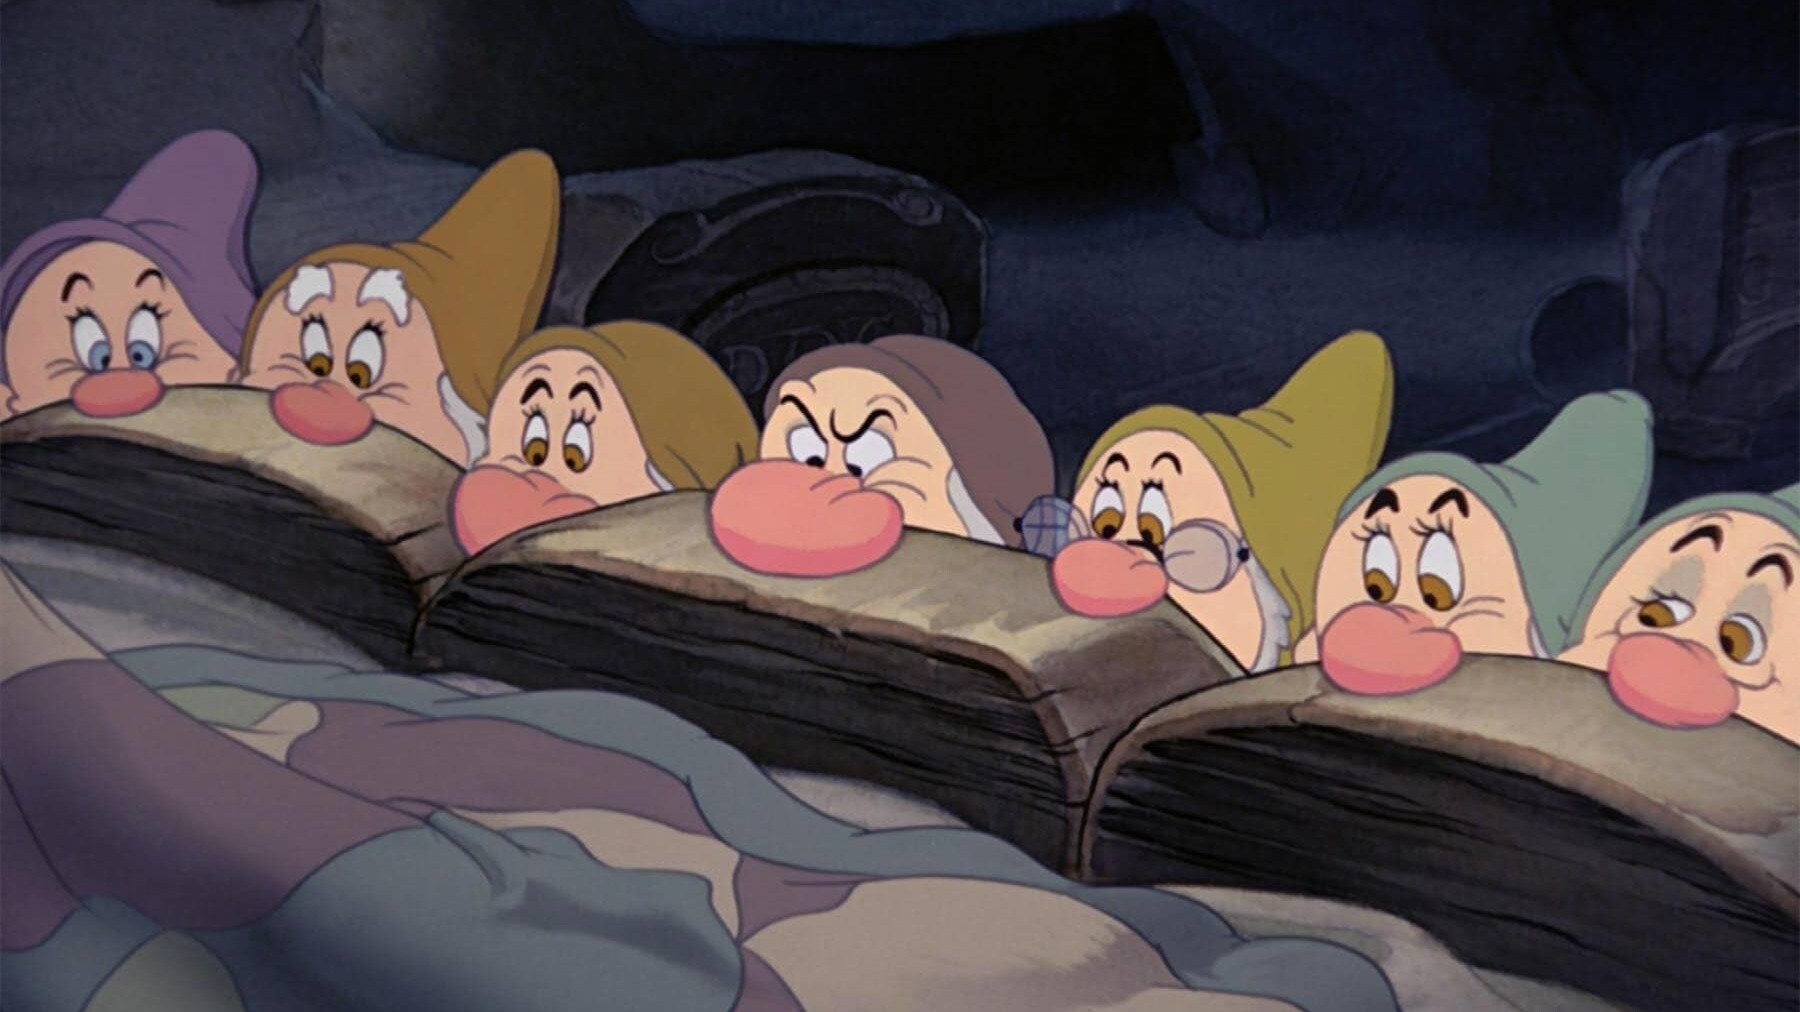 This Test Will Reveal Your Dominant Disney Personality Trait